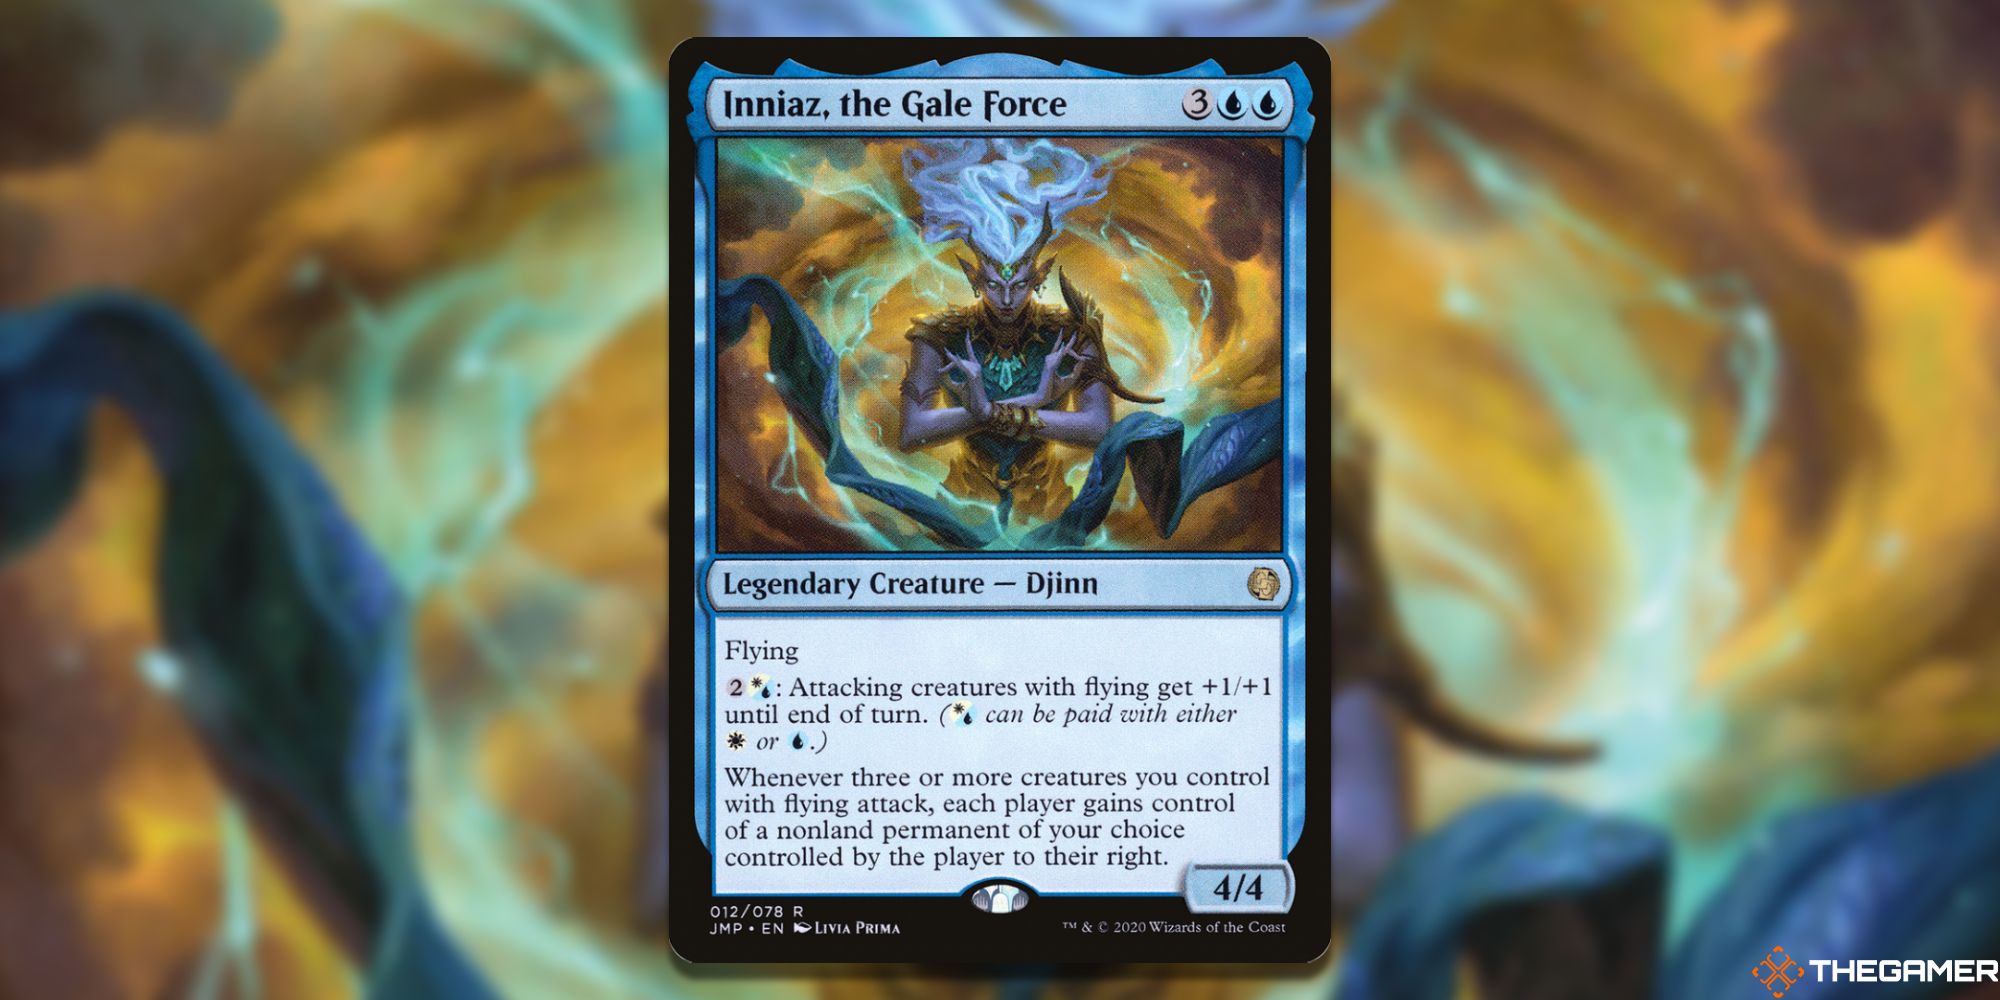 Image of Inniaz, The Gale Force card in Magic: The Gathering, with artwork by Livia Prima